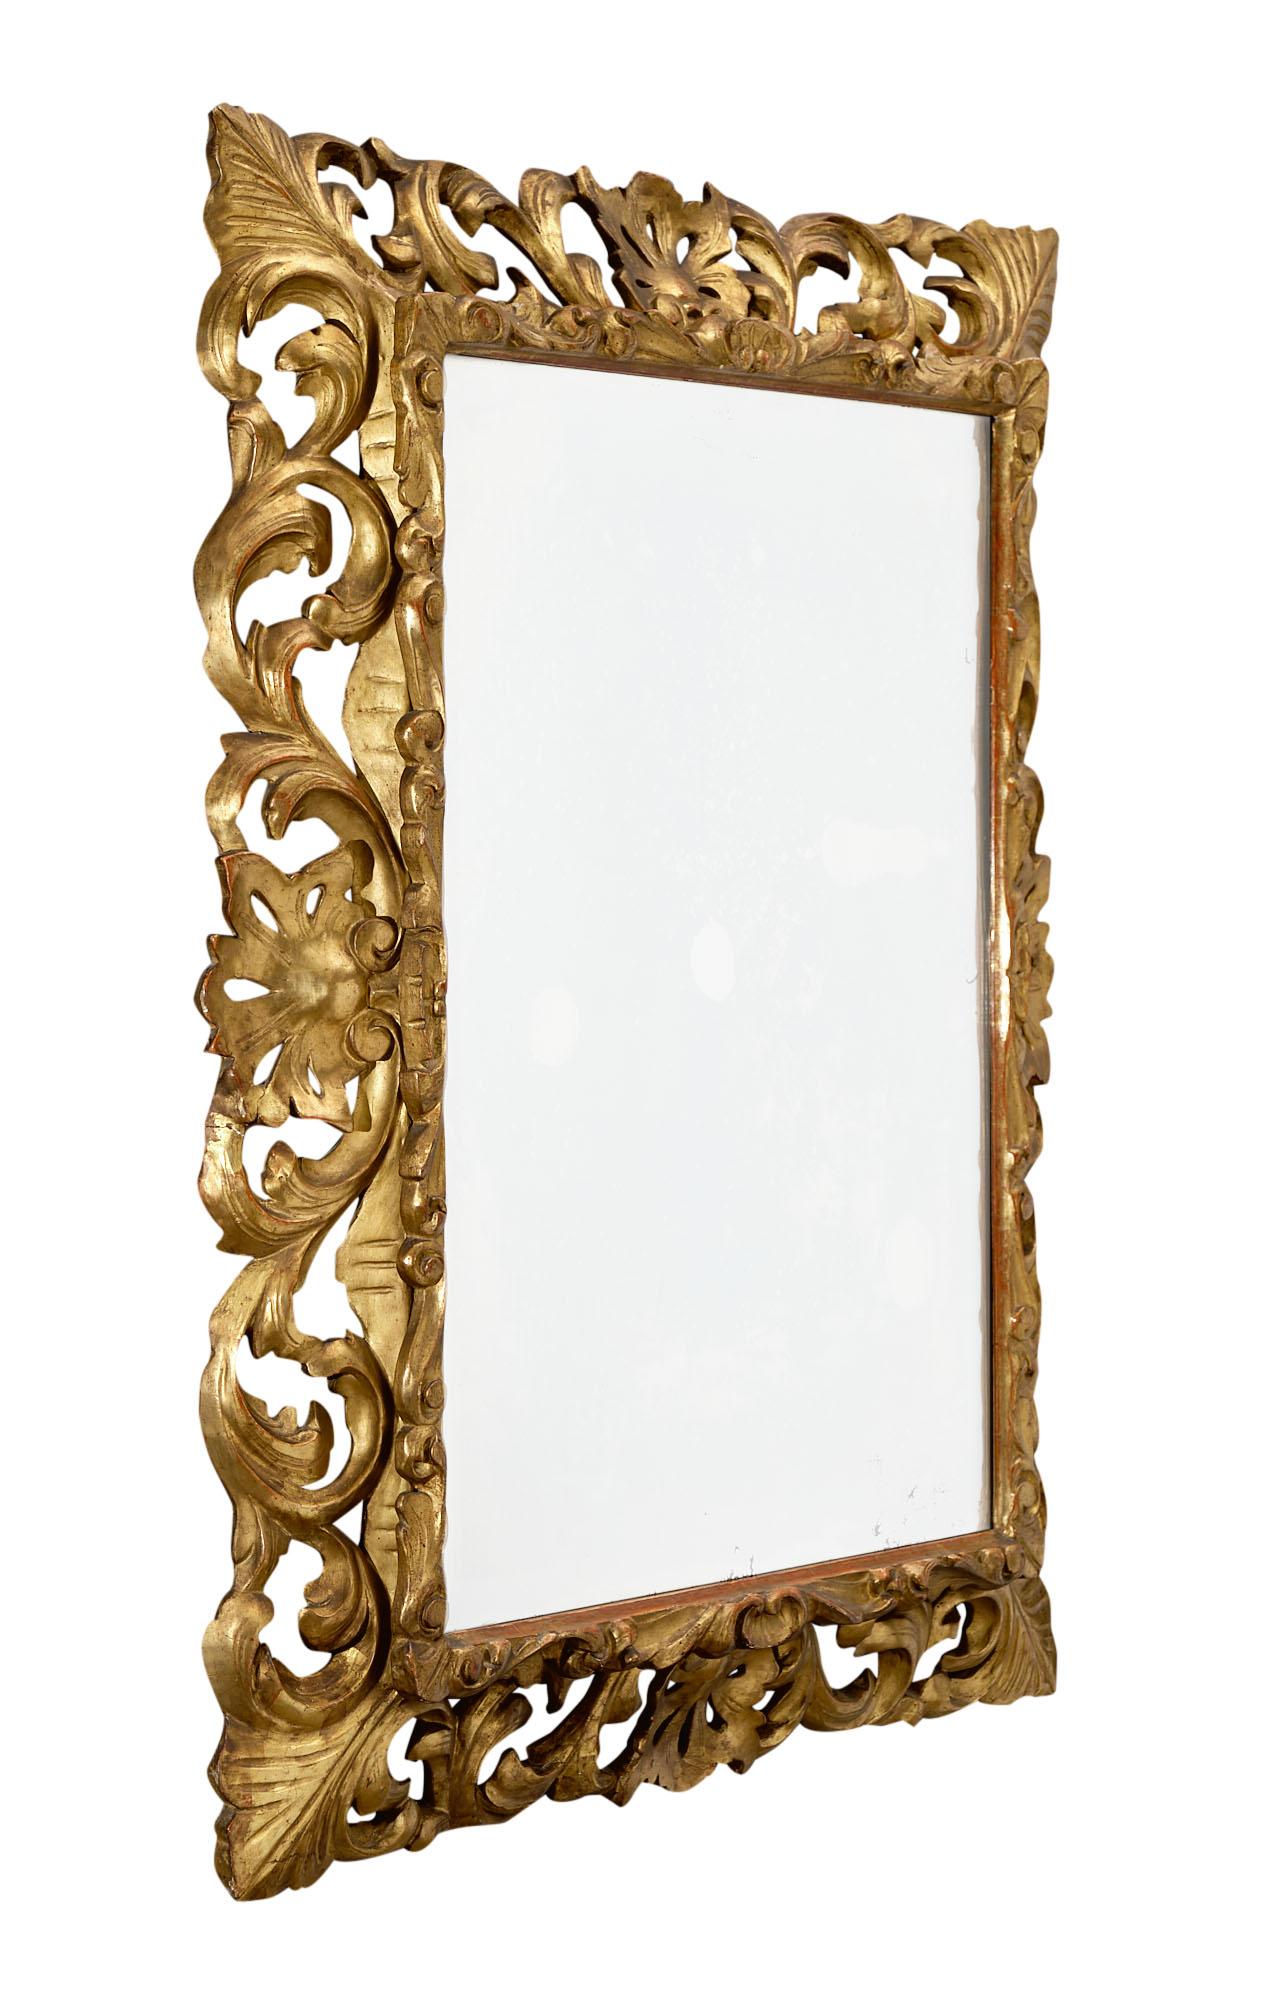 Napoleon III mirror from France made of solid hand-carved oak that has been finished with 24 carat gold leaf. The mercury mirror is original and beveled. This piece is striking and has great impact on a space.